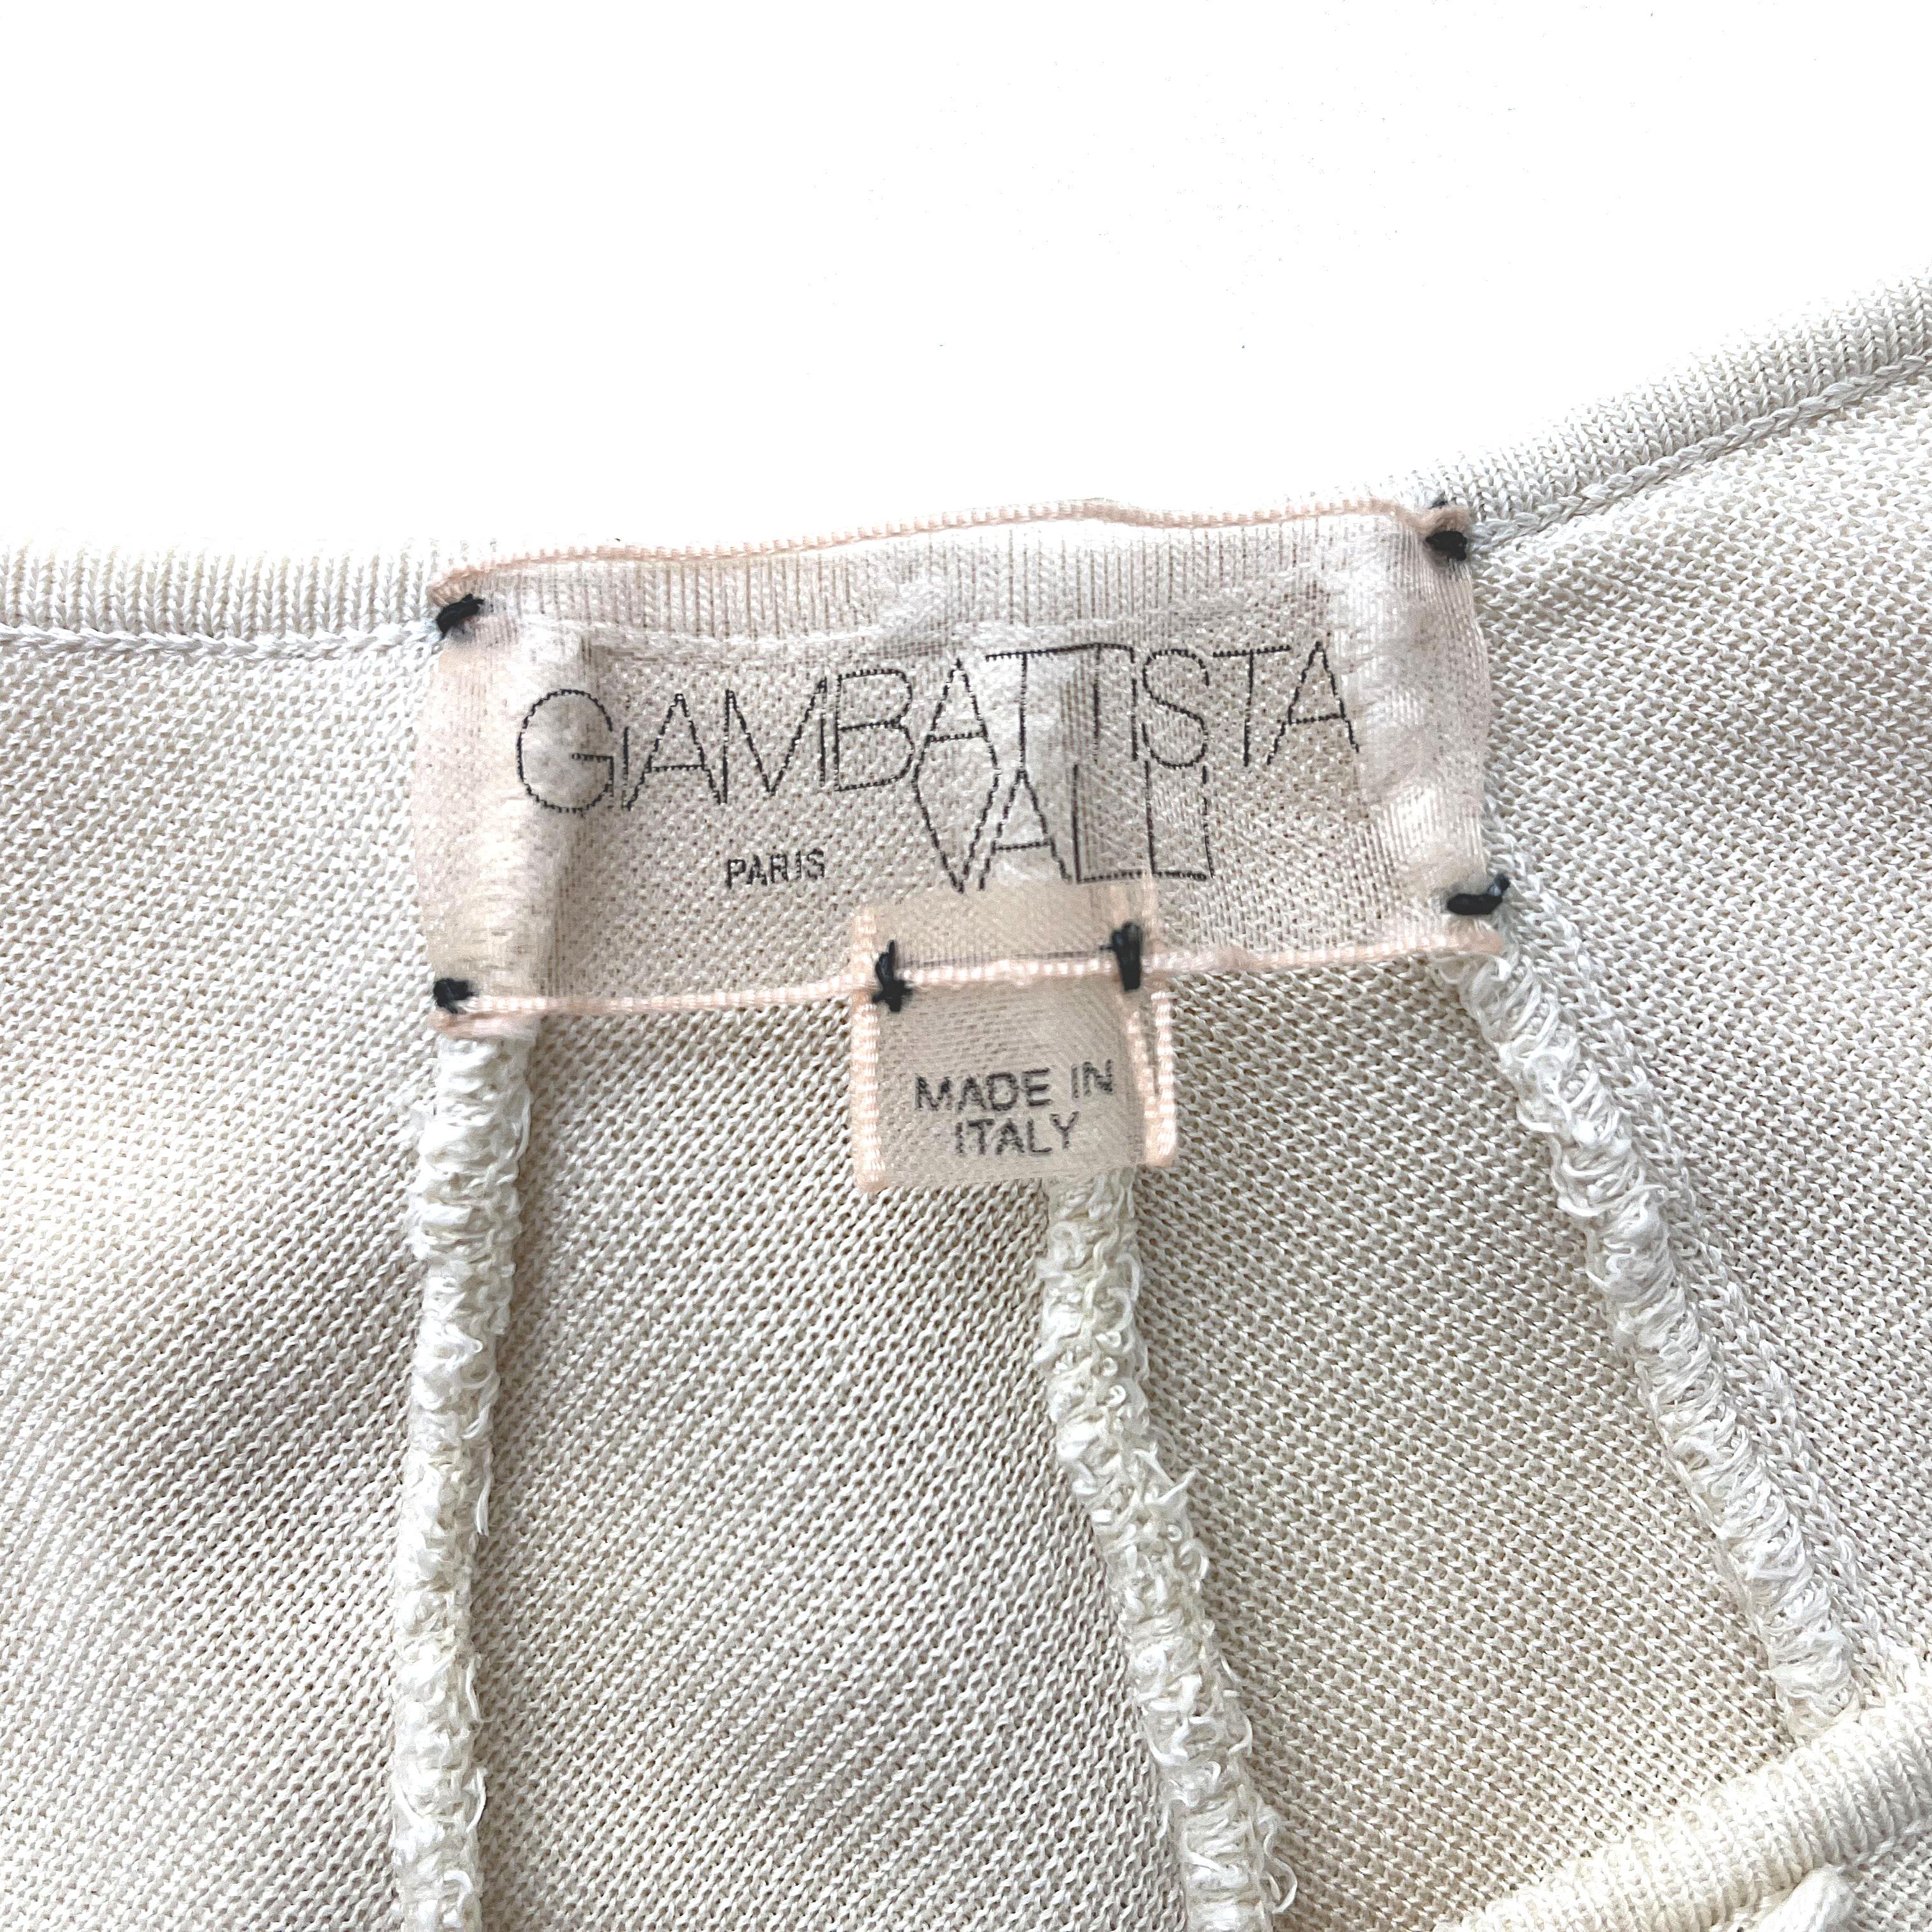 GIAMBATTISTA VALLI – Authentic Knitted Silk Top with Ruffles  Size 6US 38EU In Excellent Condition For Sale In Cuggiono, MI